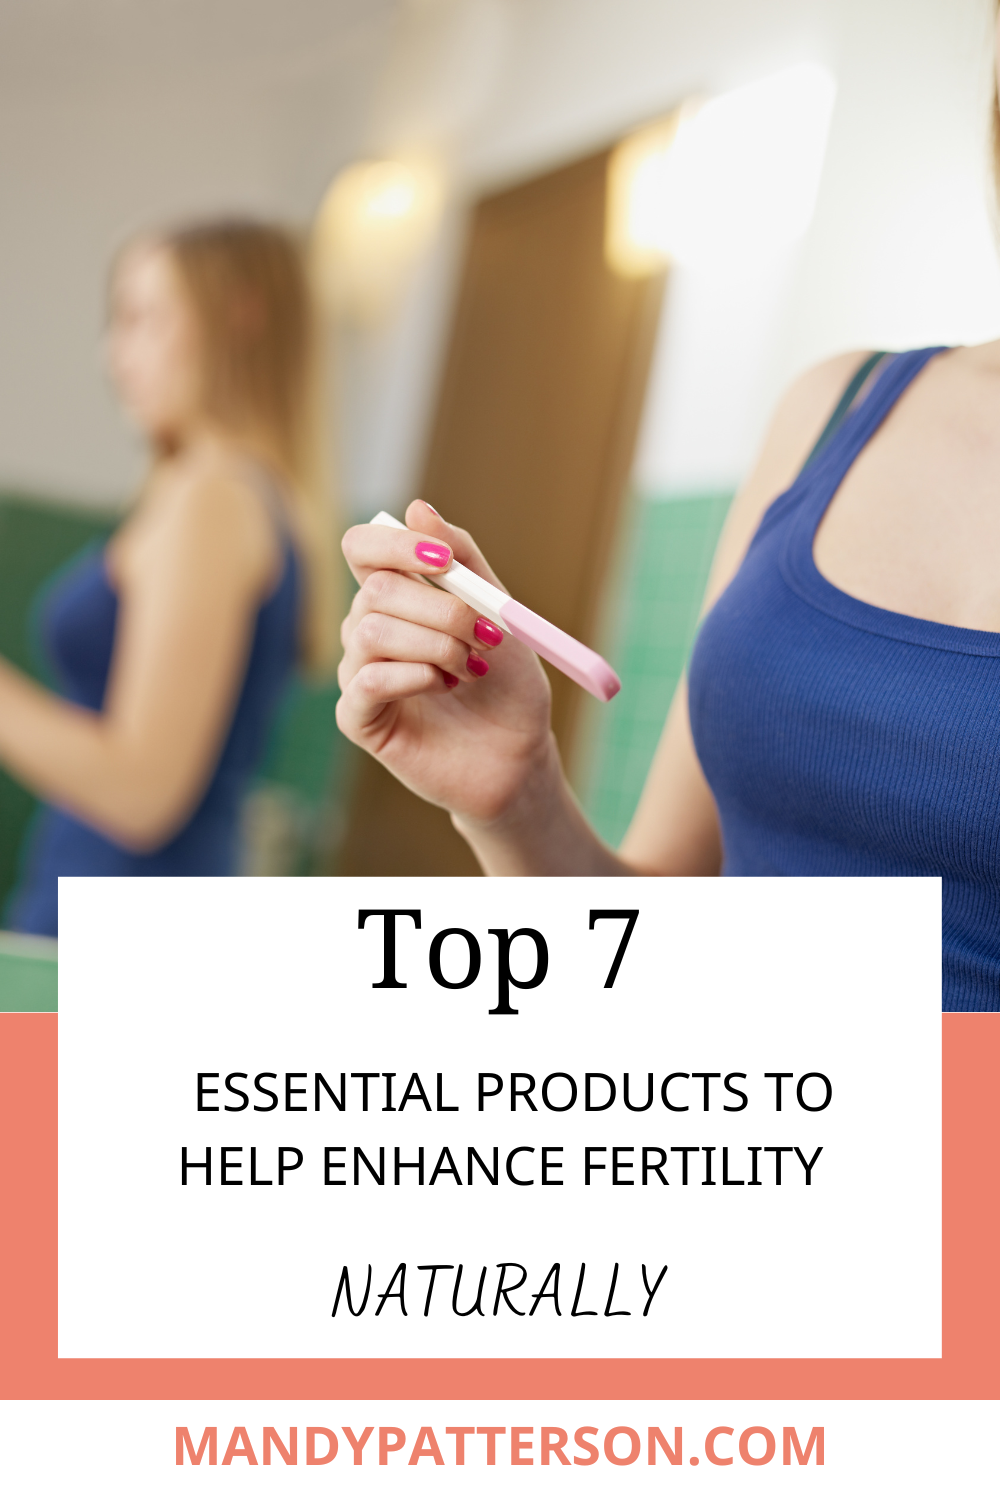 Top 7 Essential Products to help Enhance Fertility naturally